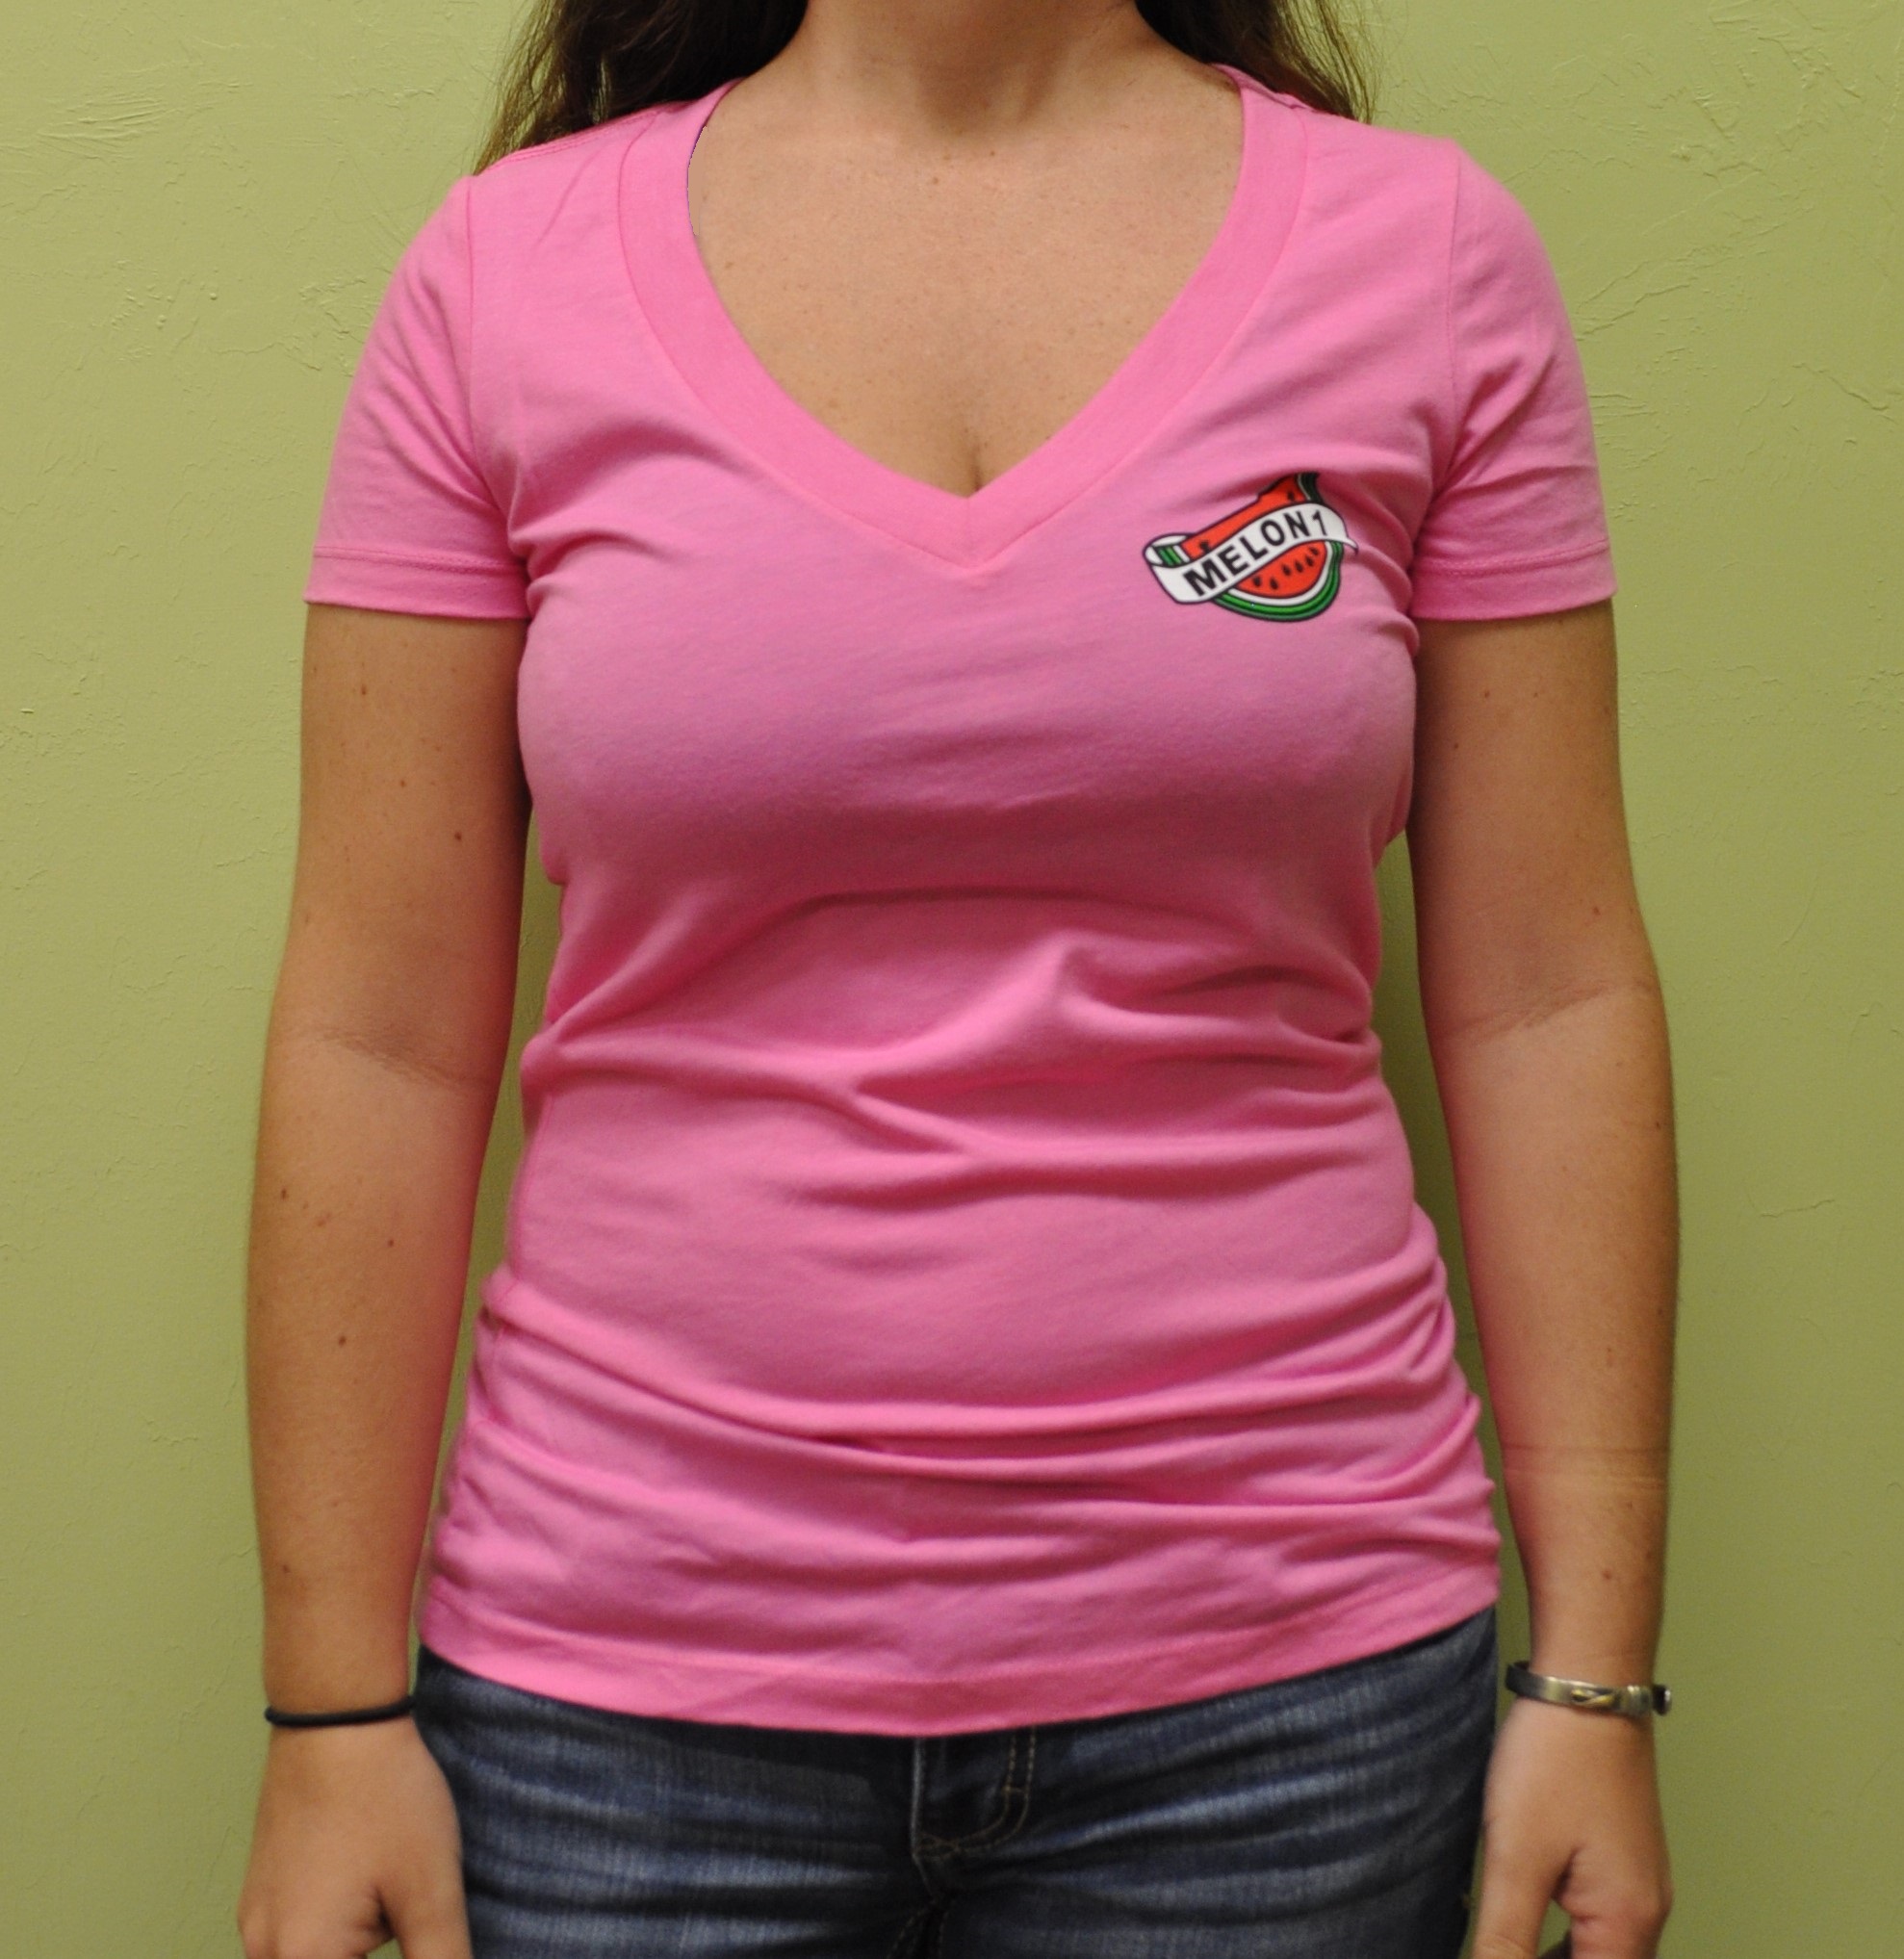 Women's Pink V-Neck 'MADE IN AMERICA' T-Shirt